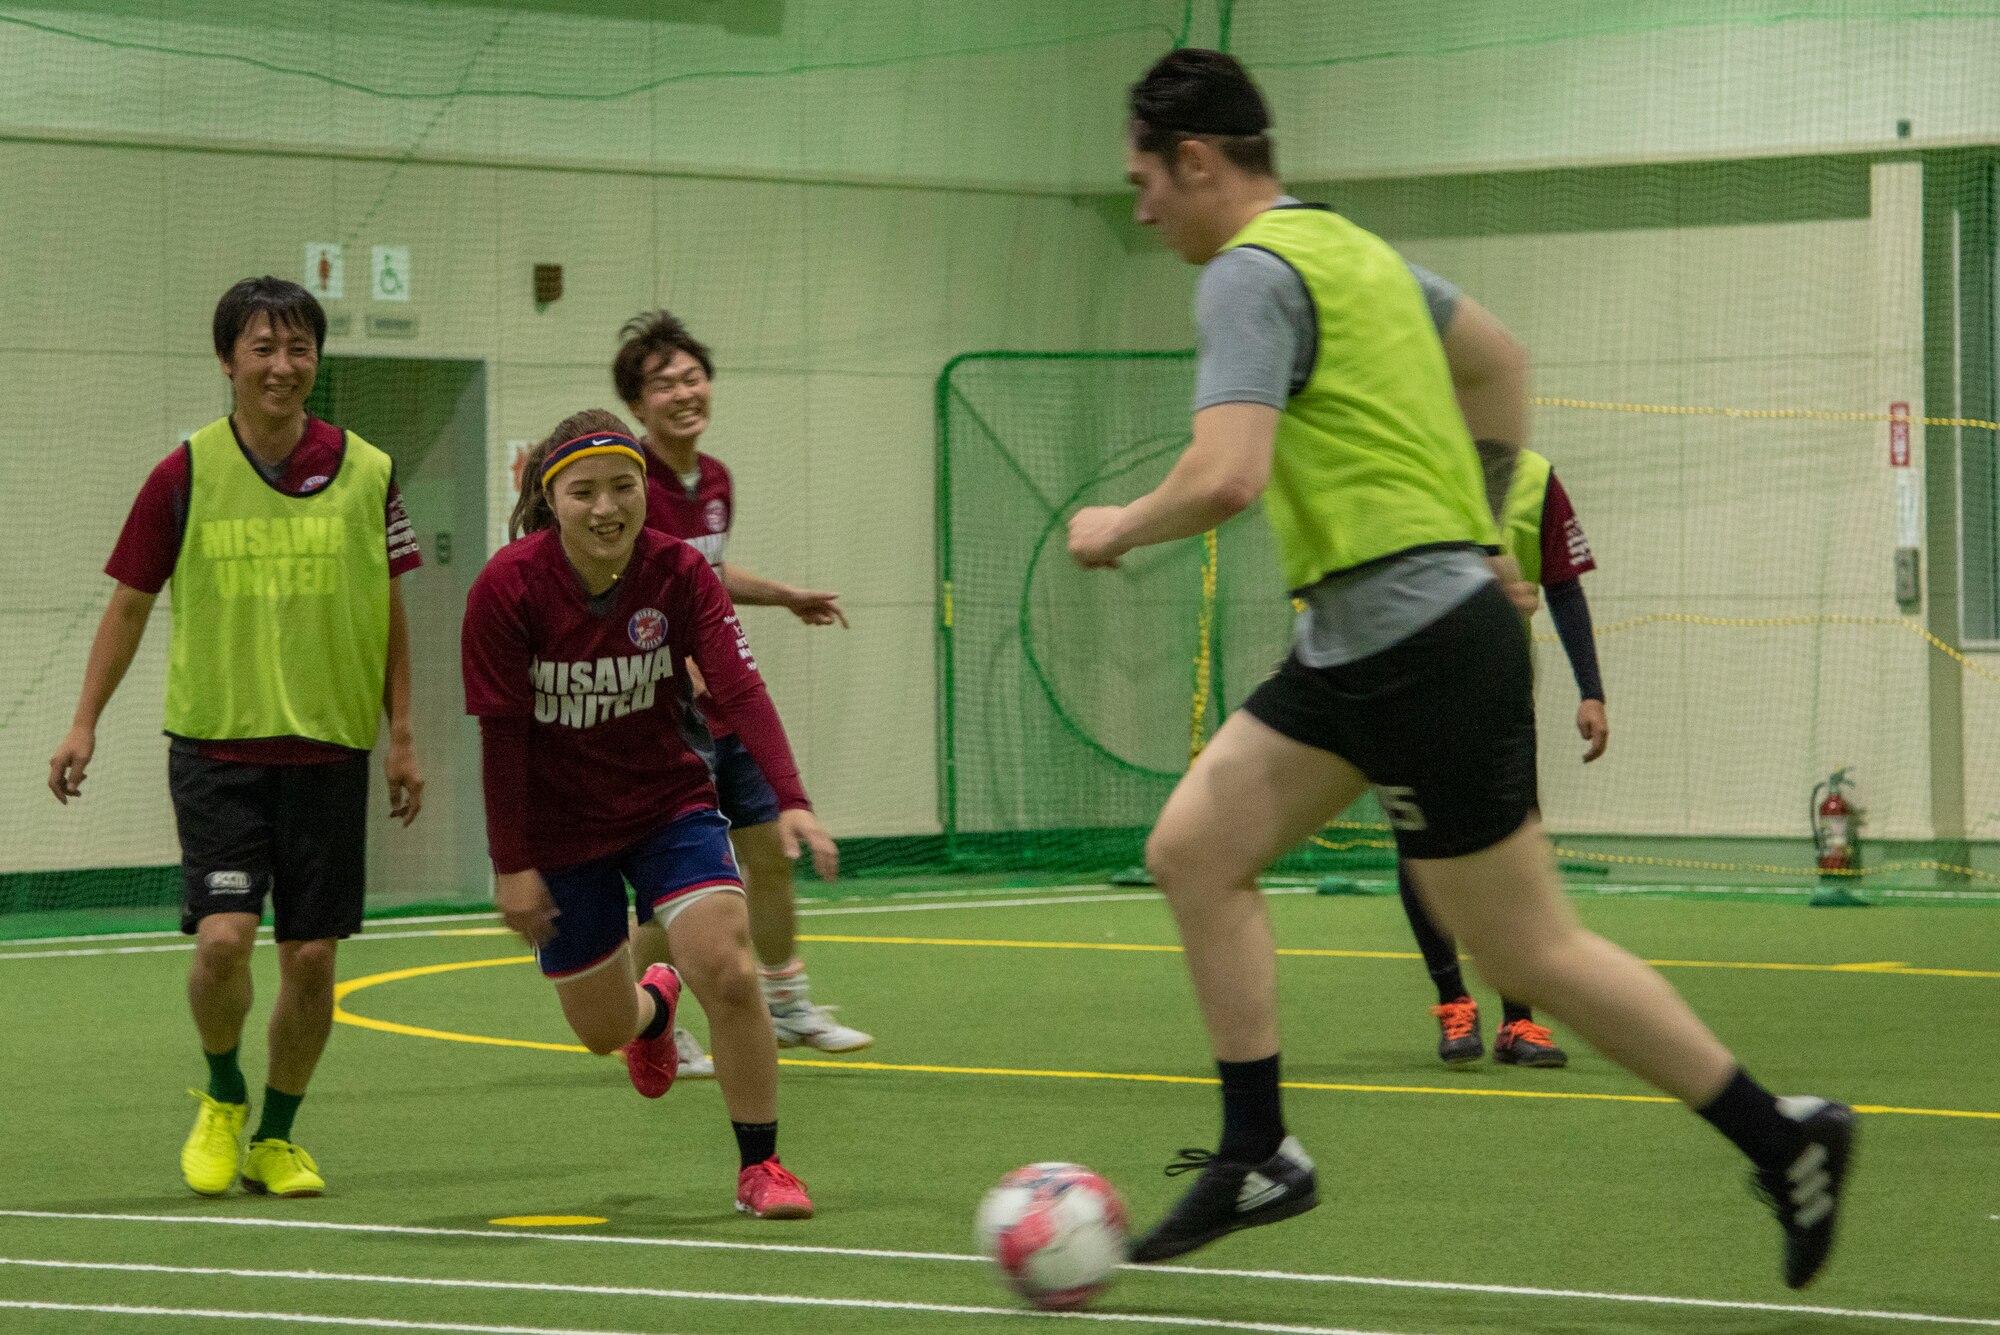 A group of soccer players practice at in indoor soccer field in Misawa.